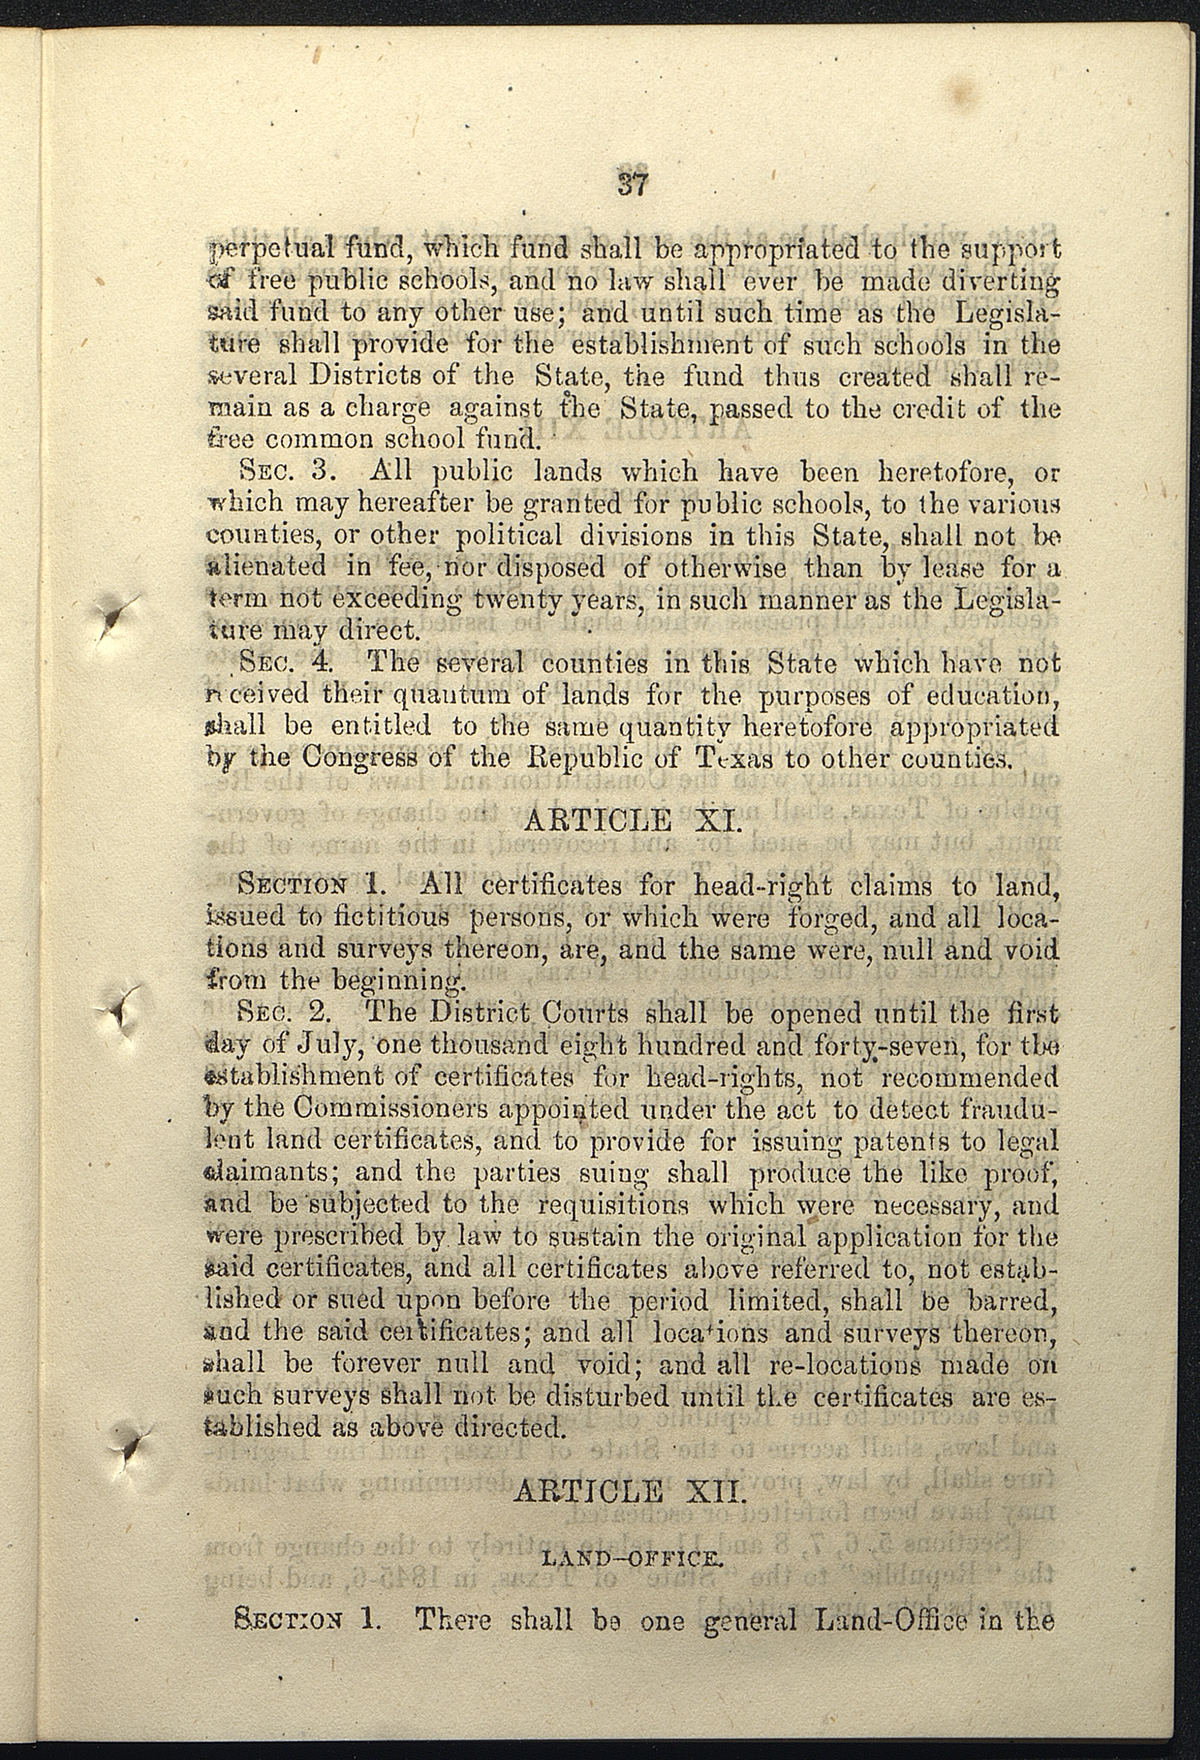 Article XII, Section 1